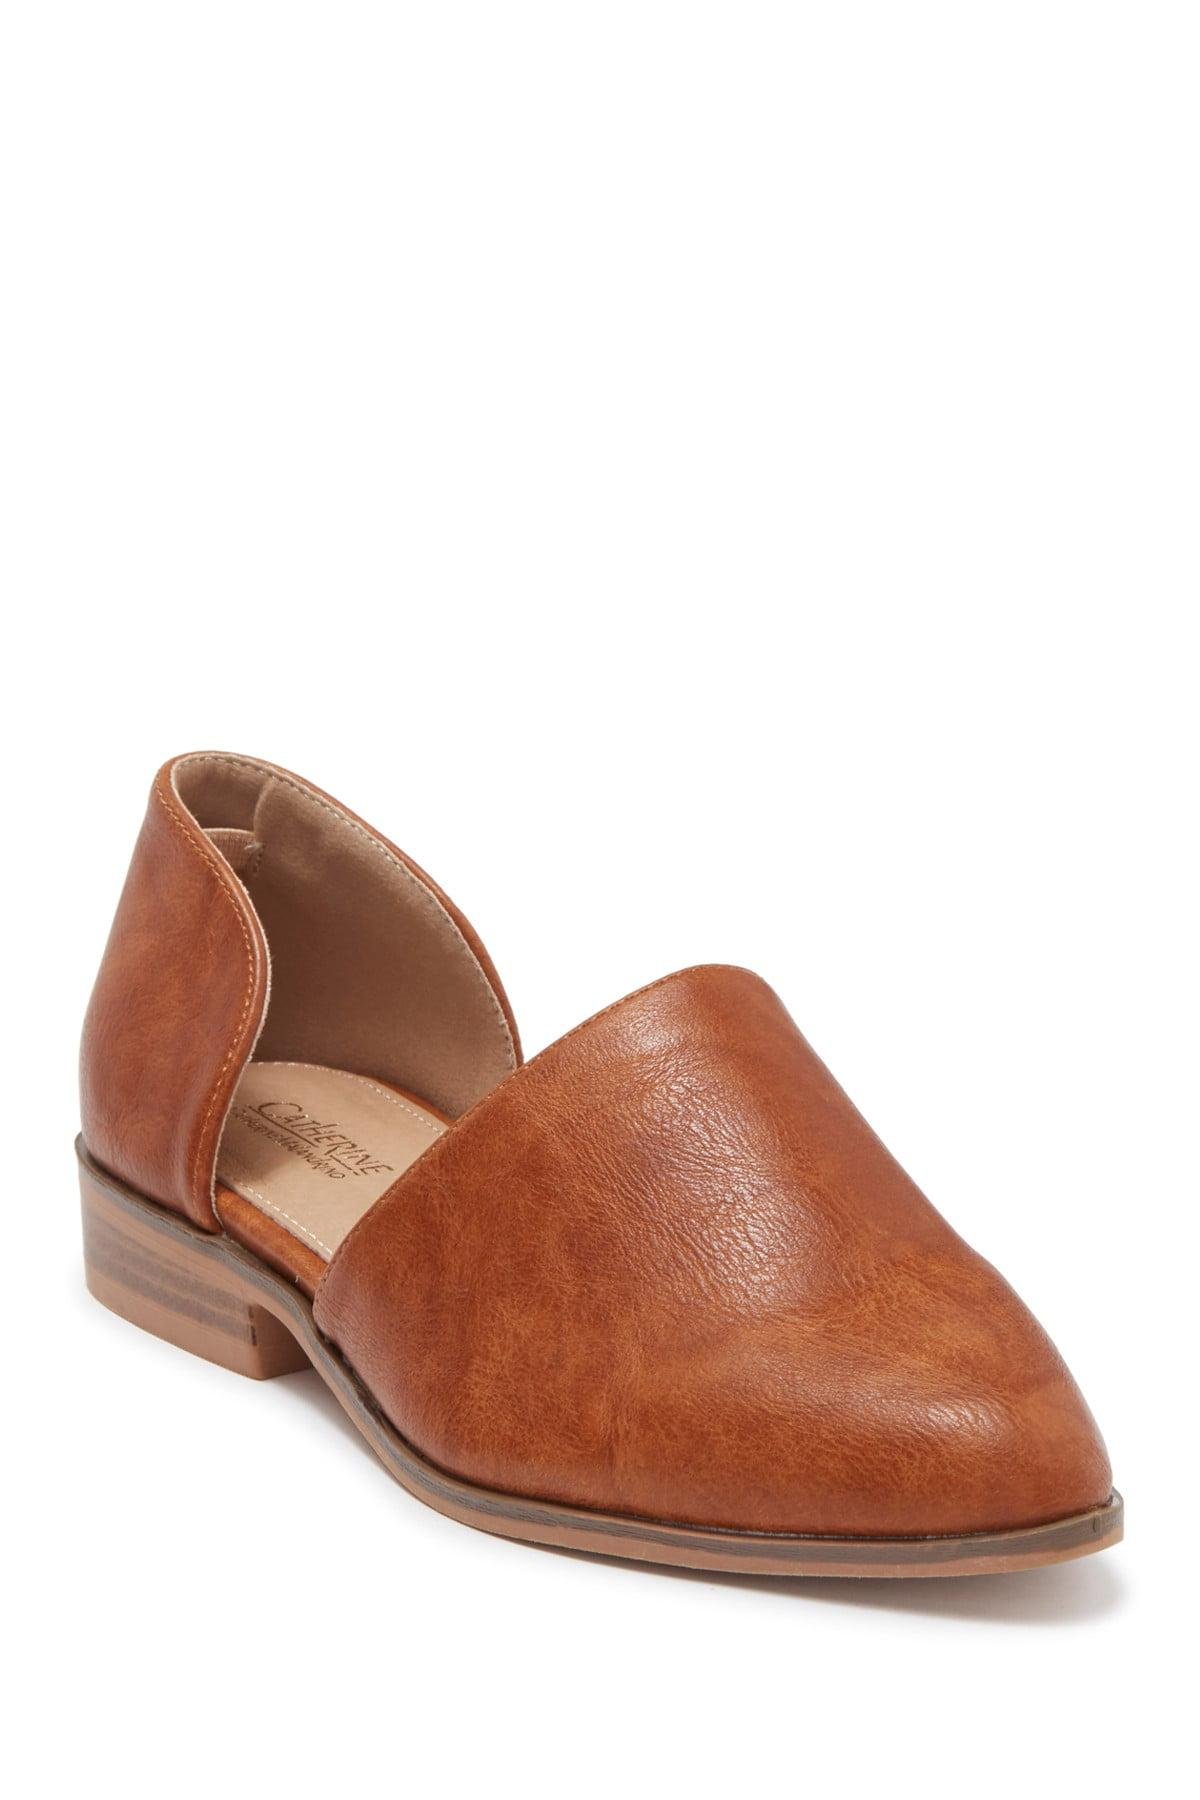 Catherine Malandrino Alaney D'orsay Flat in Brown | Lyst